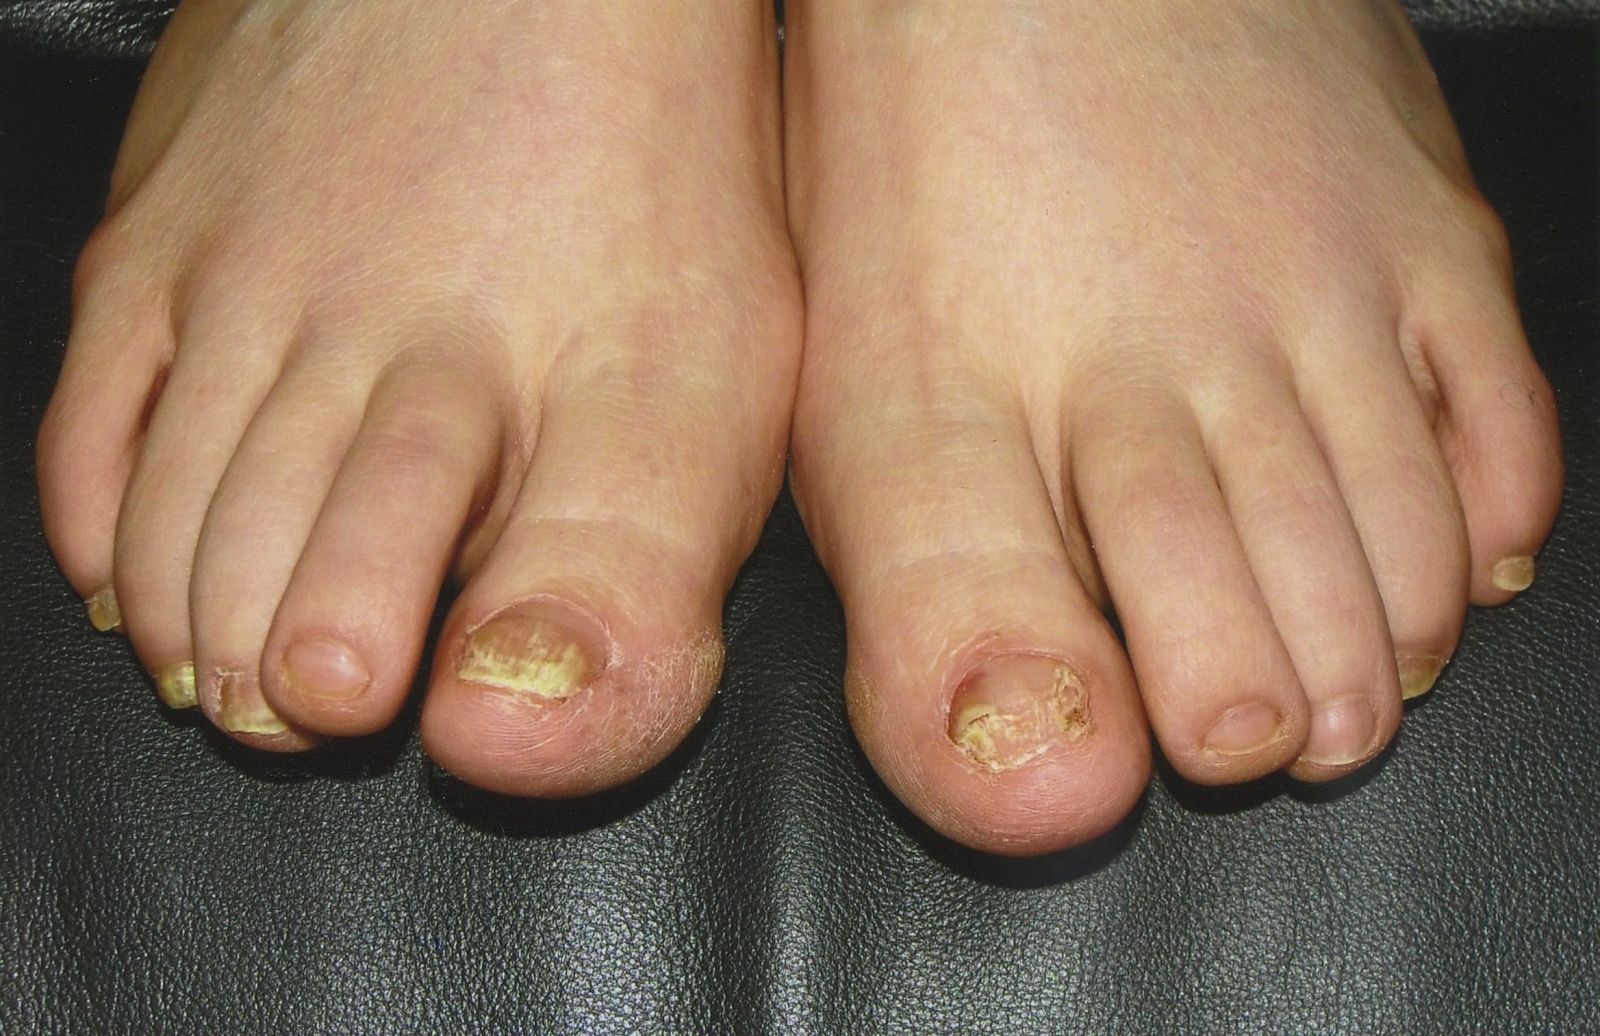 Before the laser treatment for toenail fungus